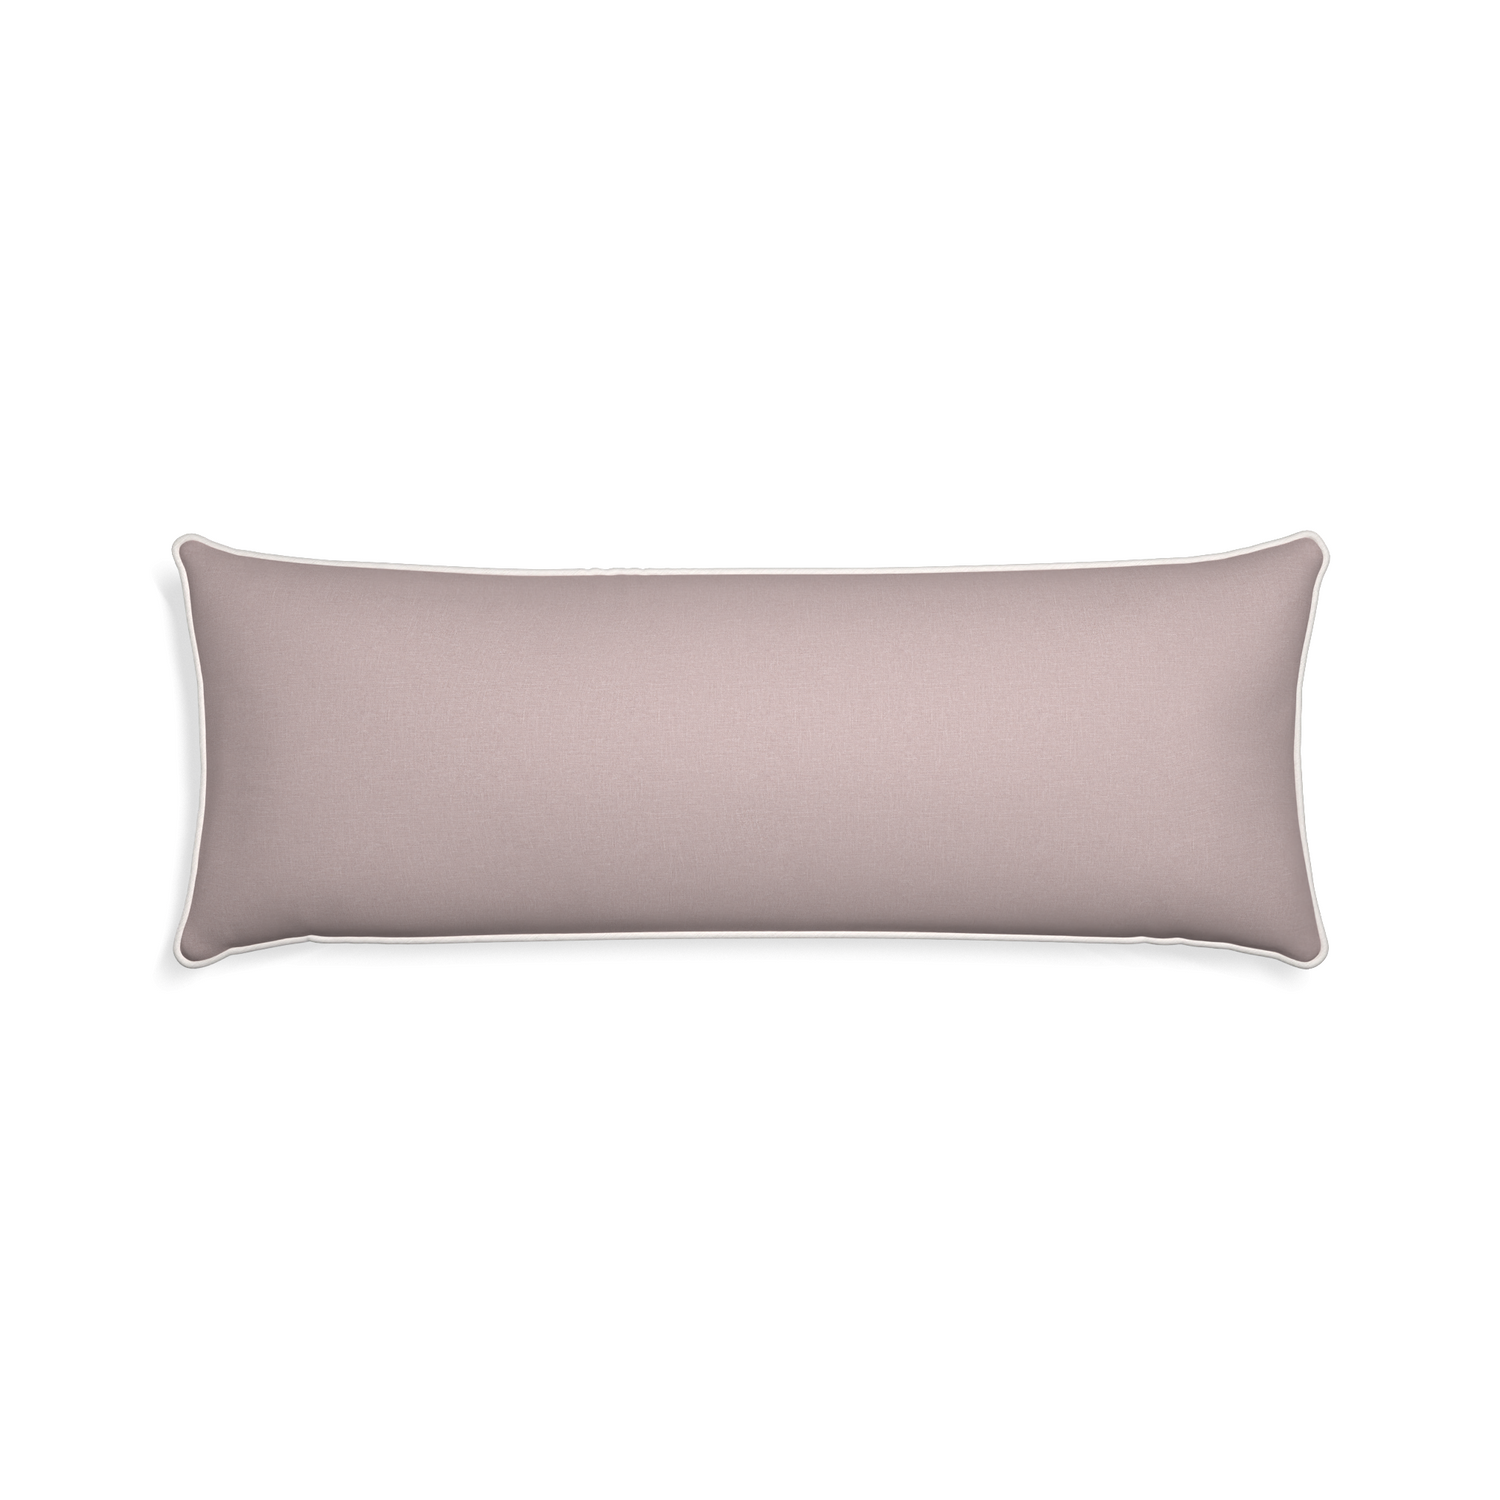 Xl-lumbar orchid custom mauve pinkpillow with snow piping on white background